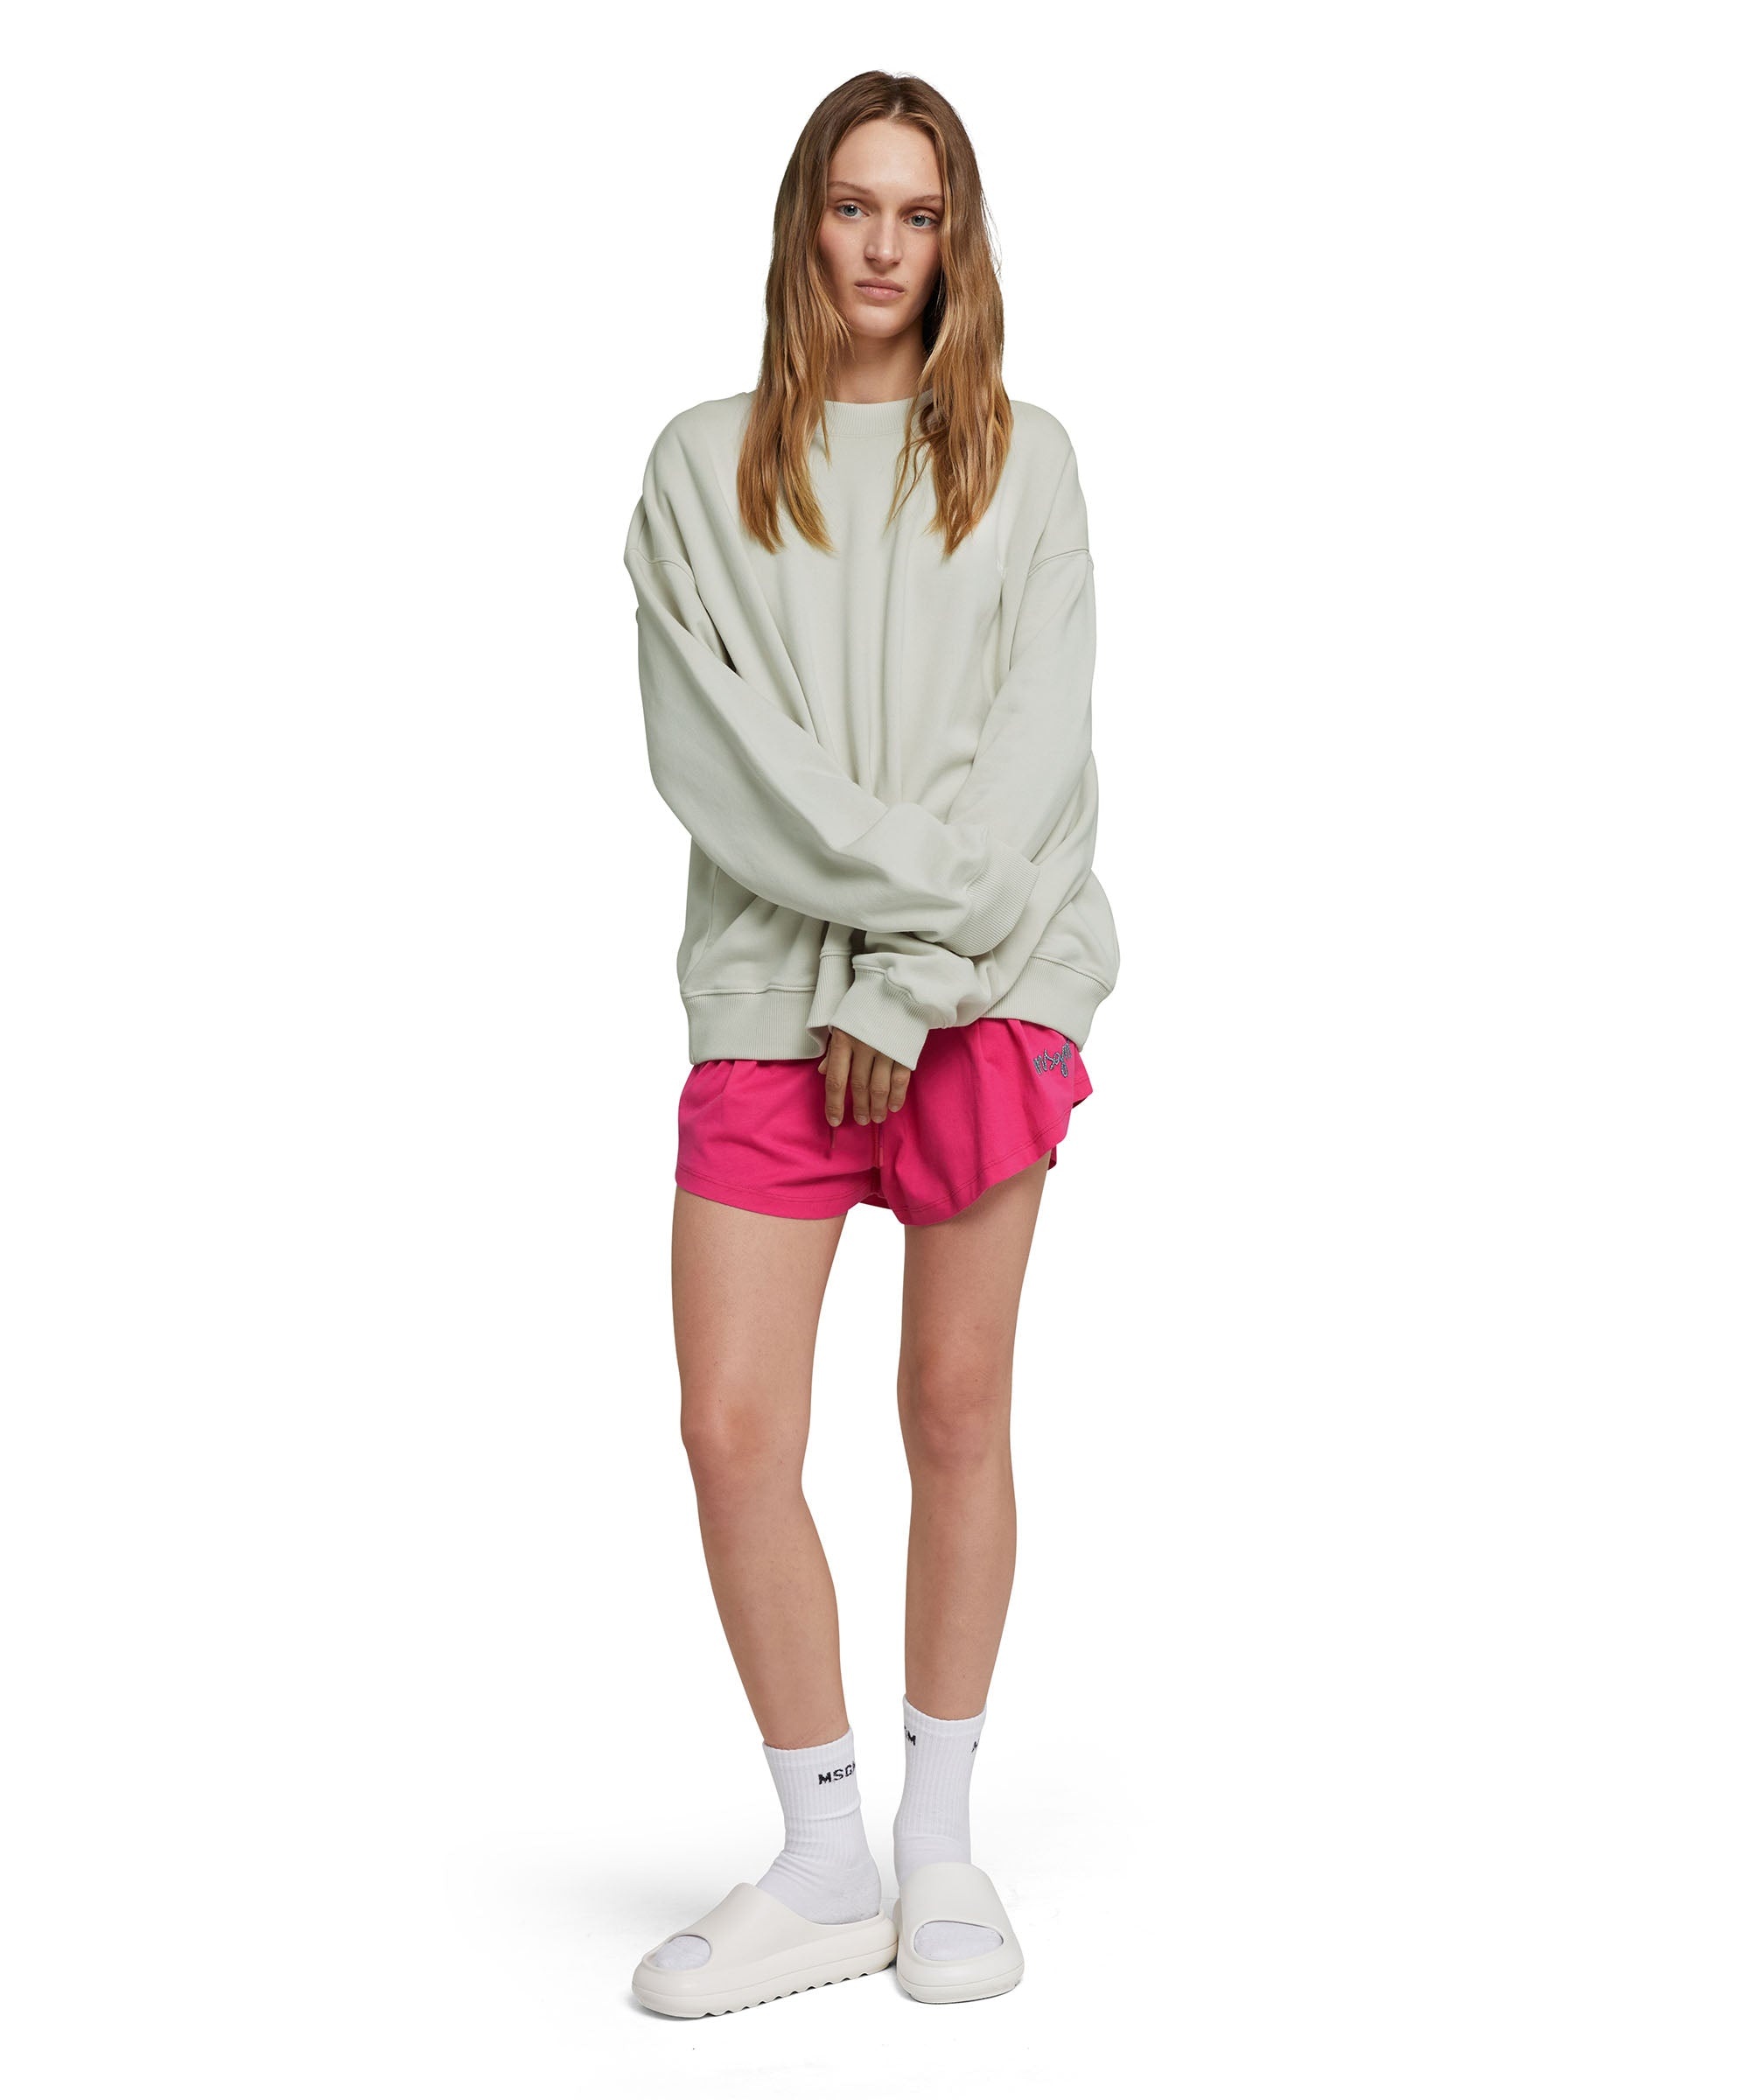 Sweatshirt shorts with embroidered logo - 5